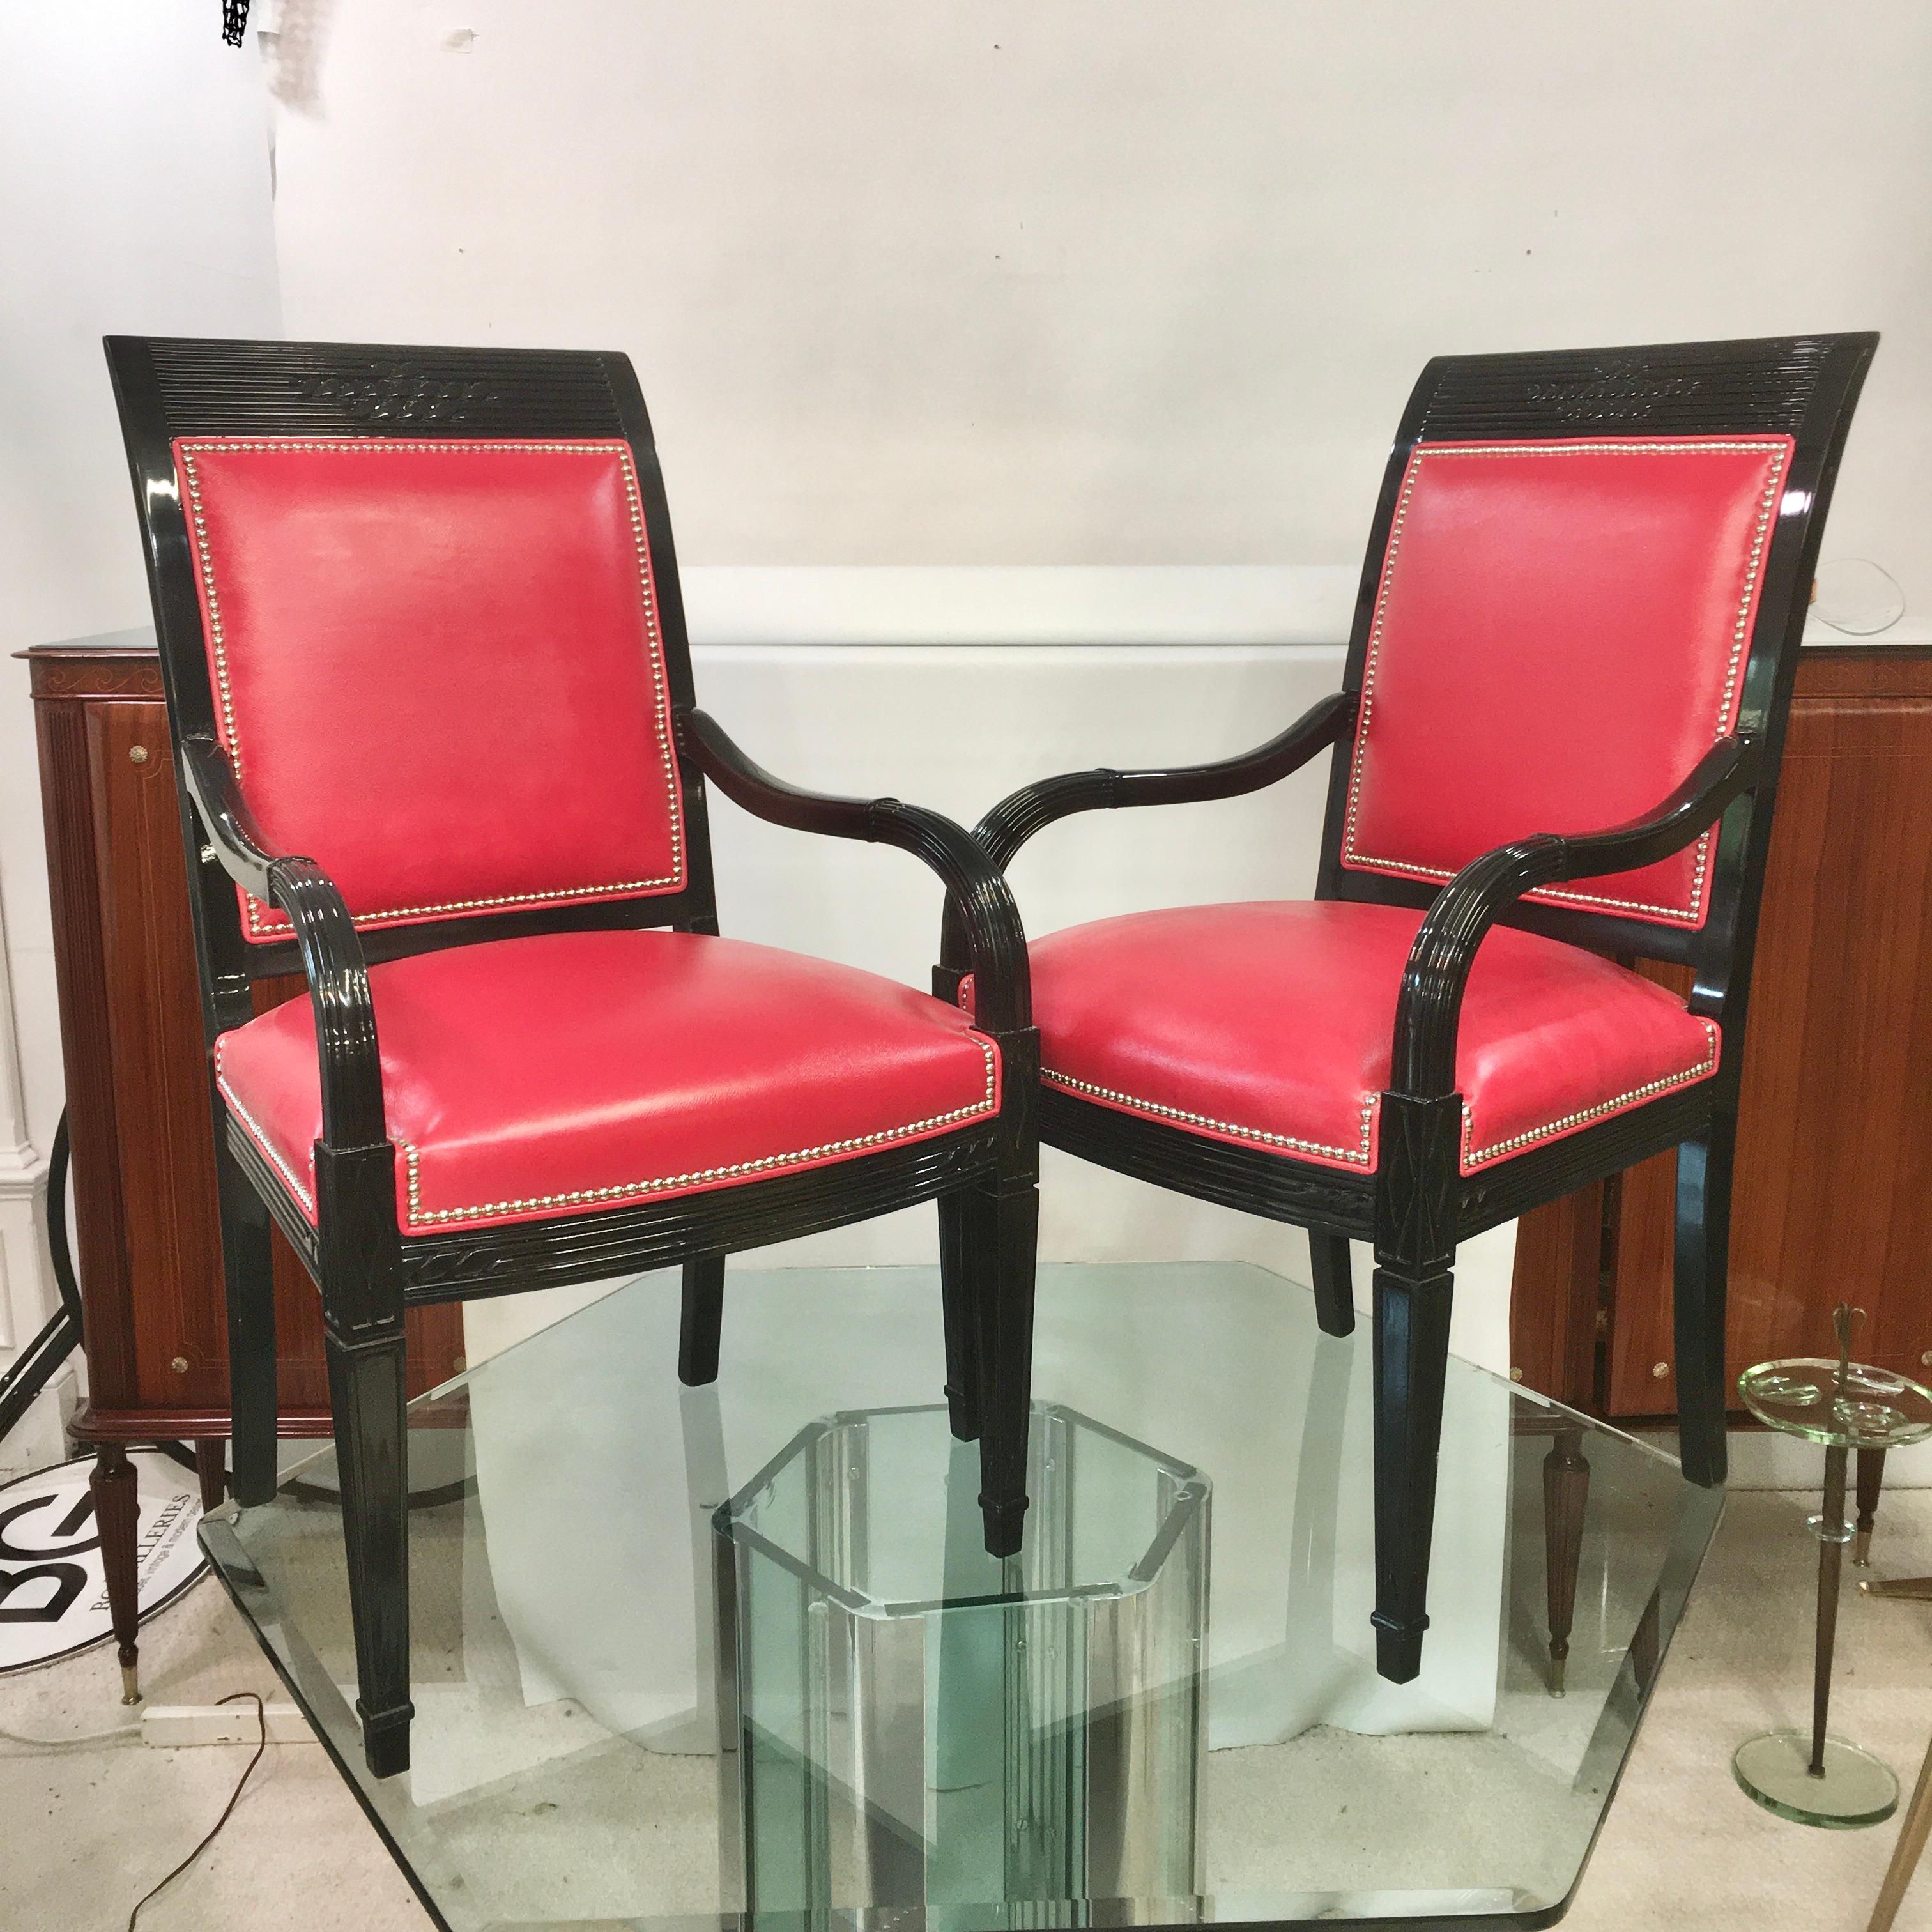 Pair of Art Deco style black lacquered armchairs with red leather upholstery and nickel plated brass nailheads. 
Arm height 25 inches.
 